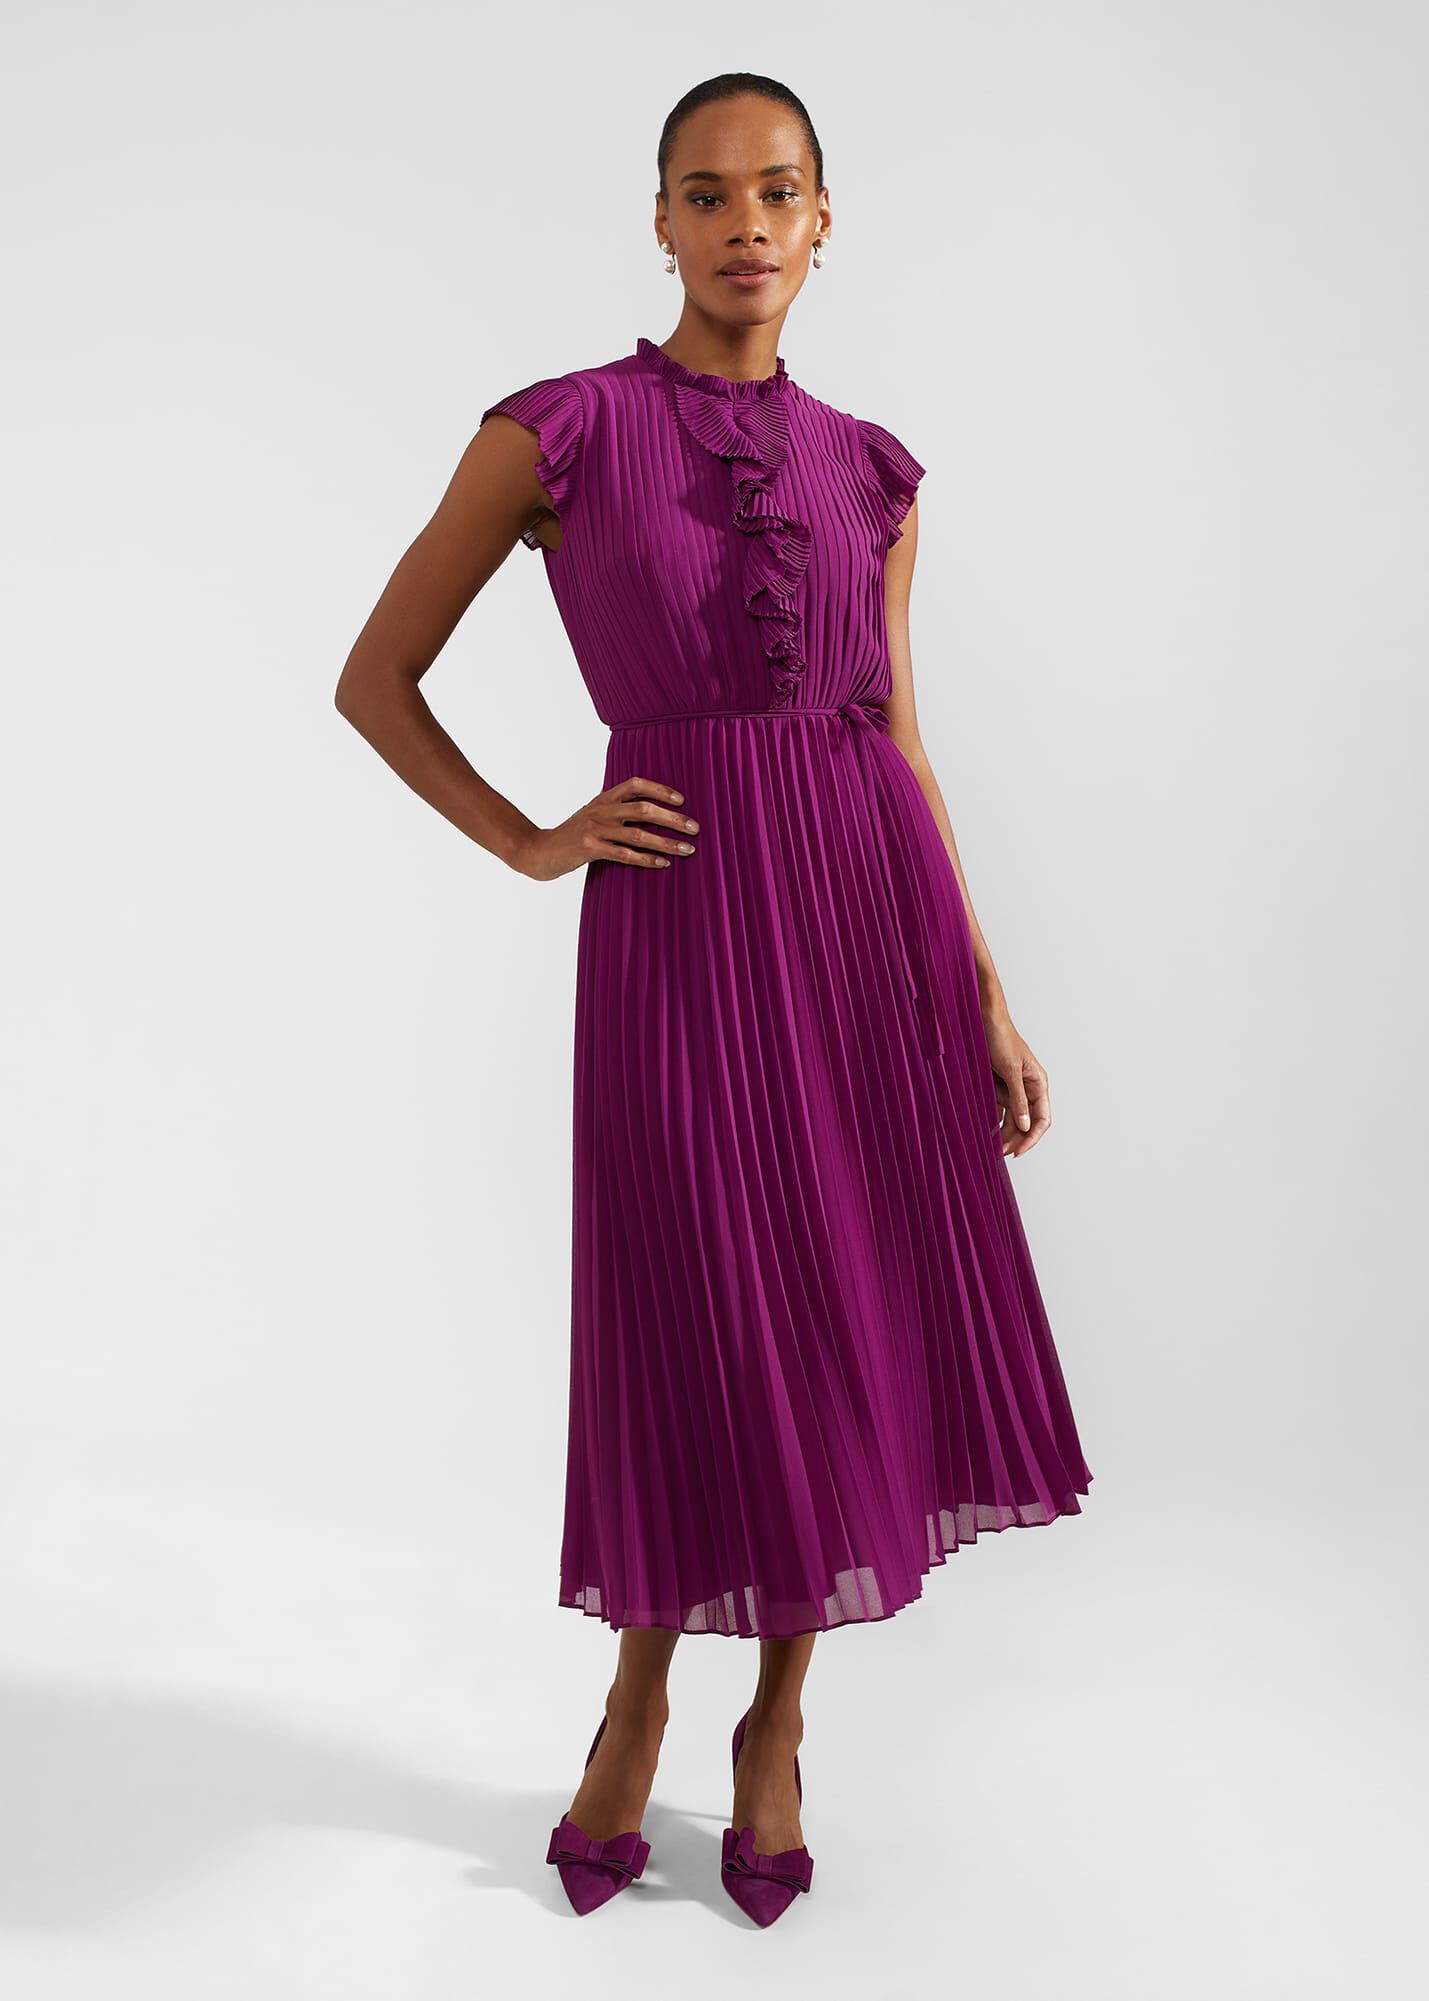 Women's Dresses & Jumpsuits I Casual & Formal Styles | Hobbs US |